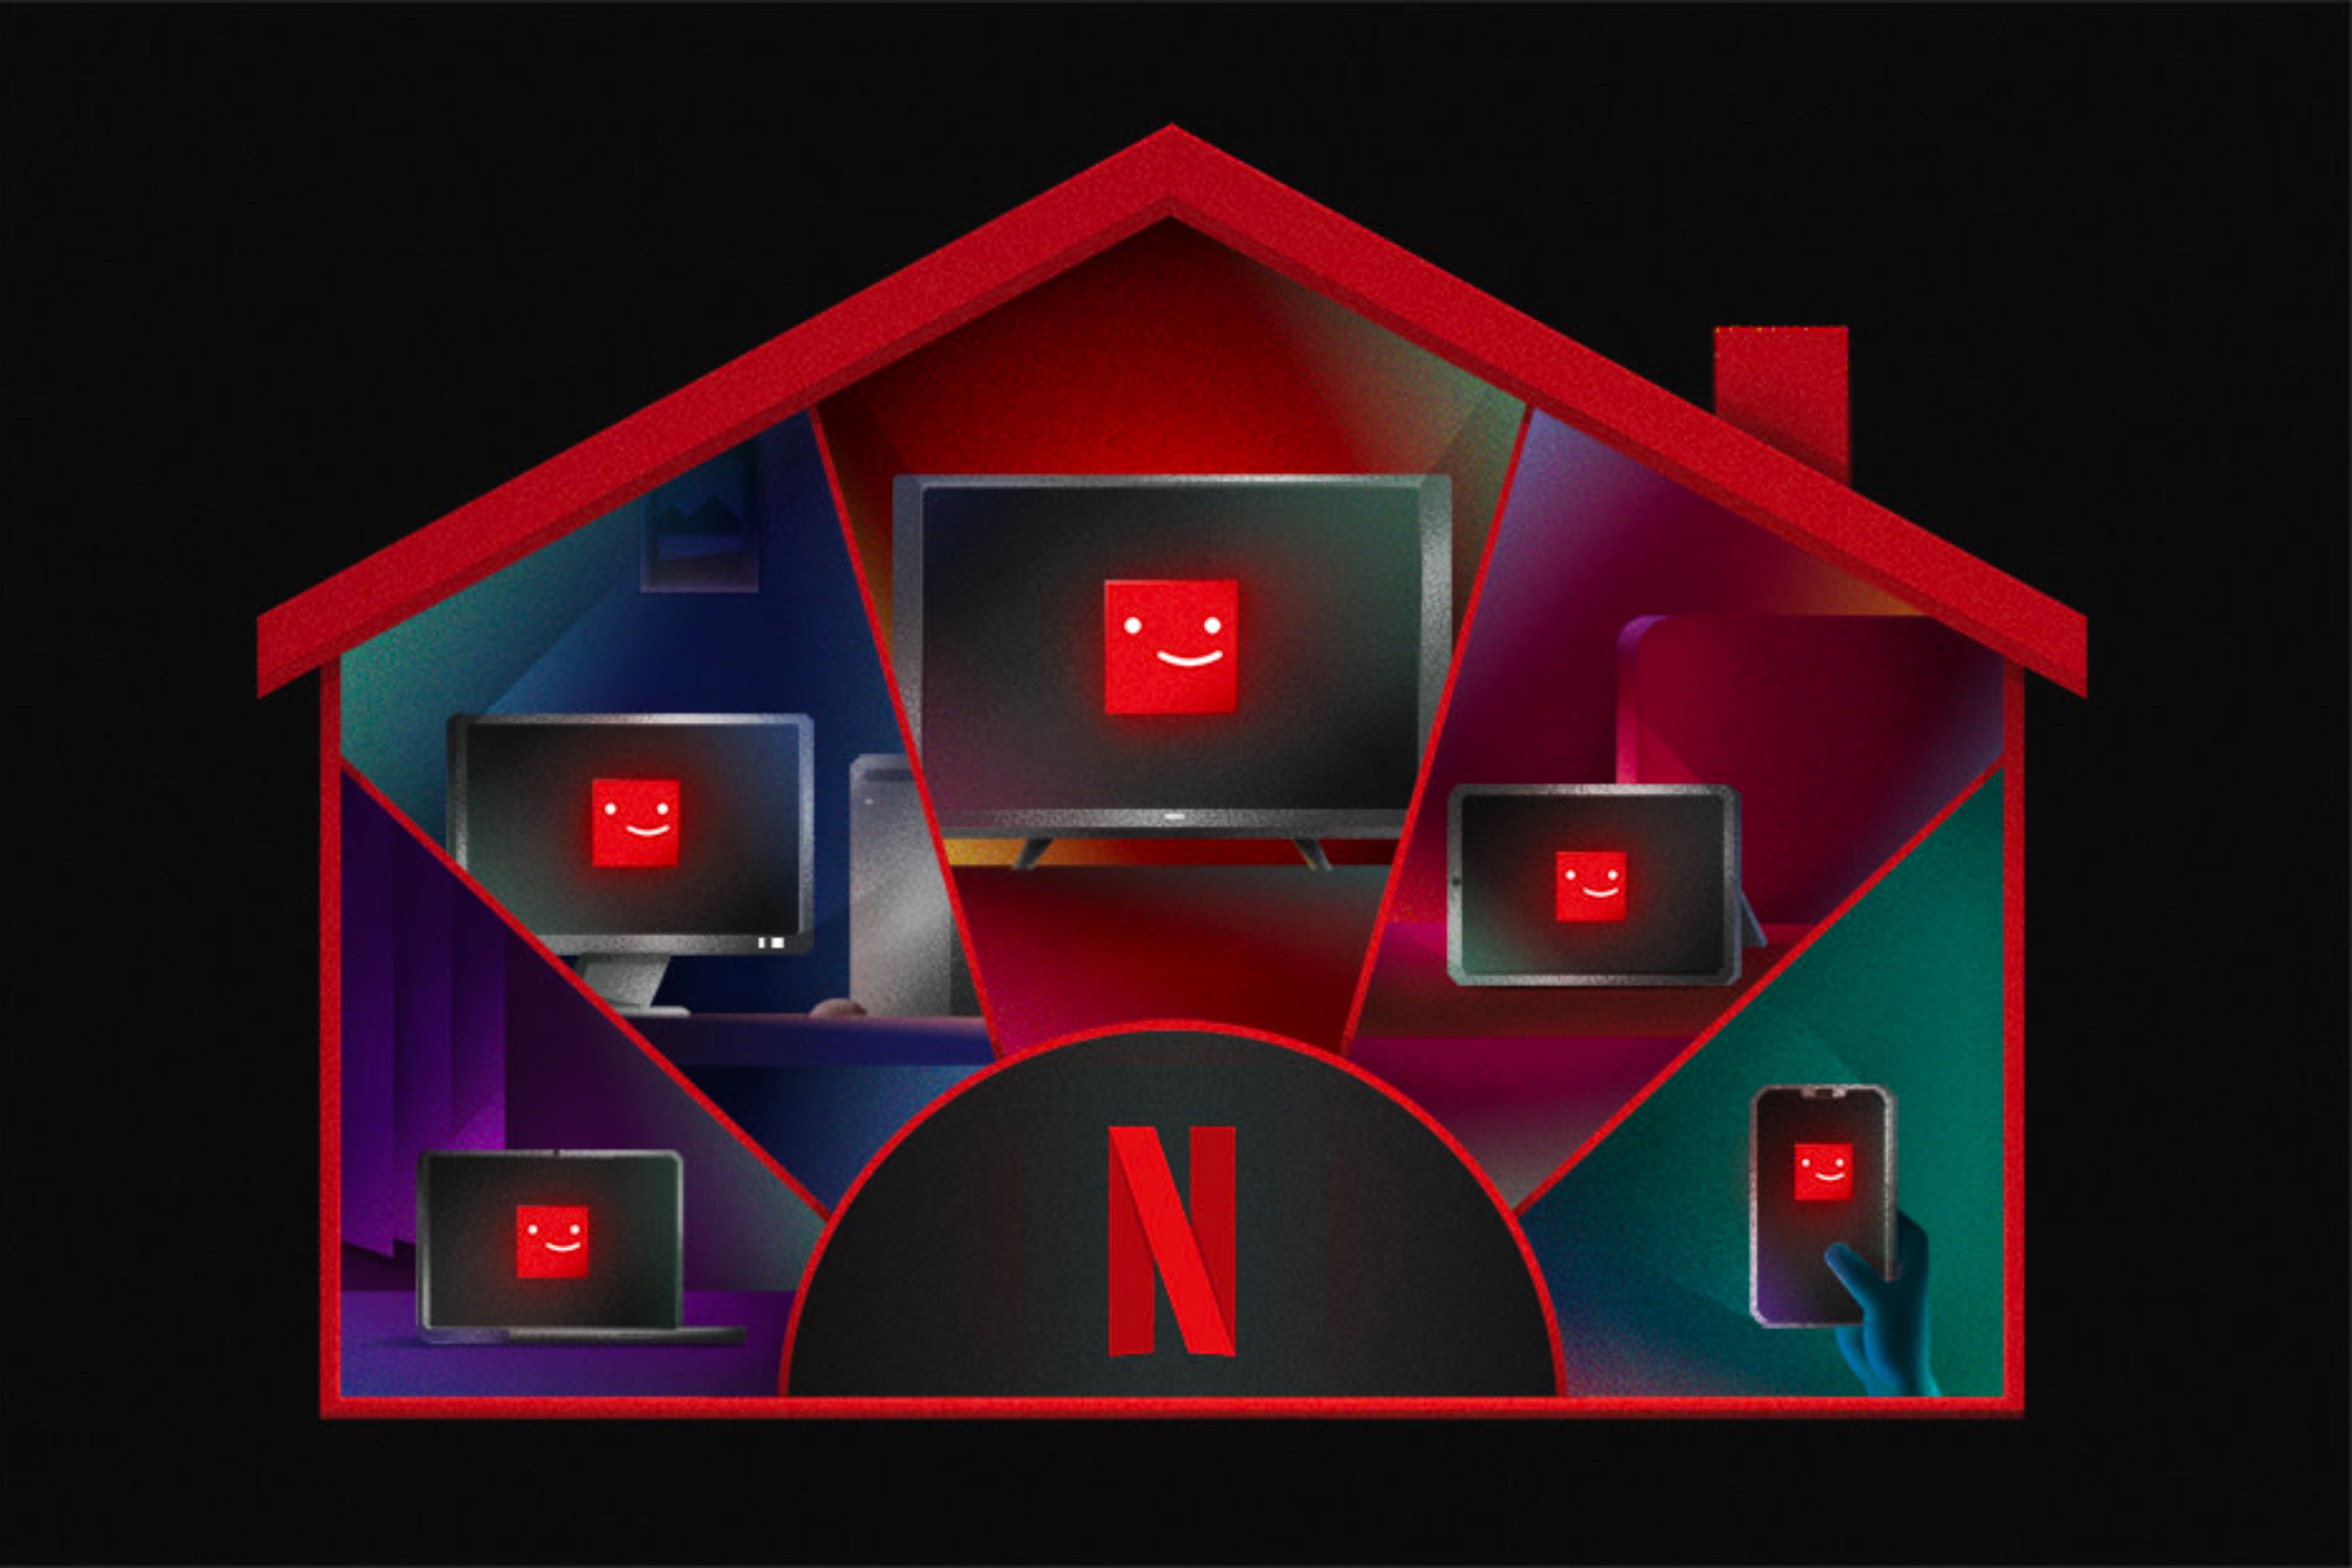 A promotional image showing Netflix's household sharing policy.